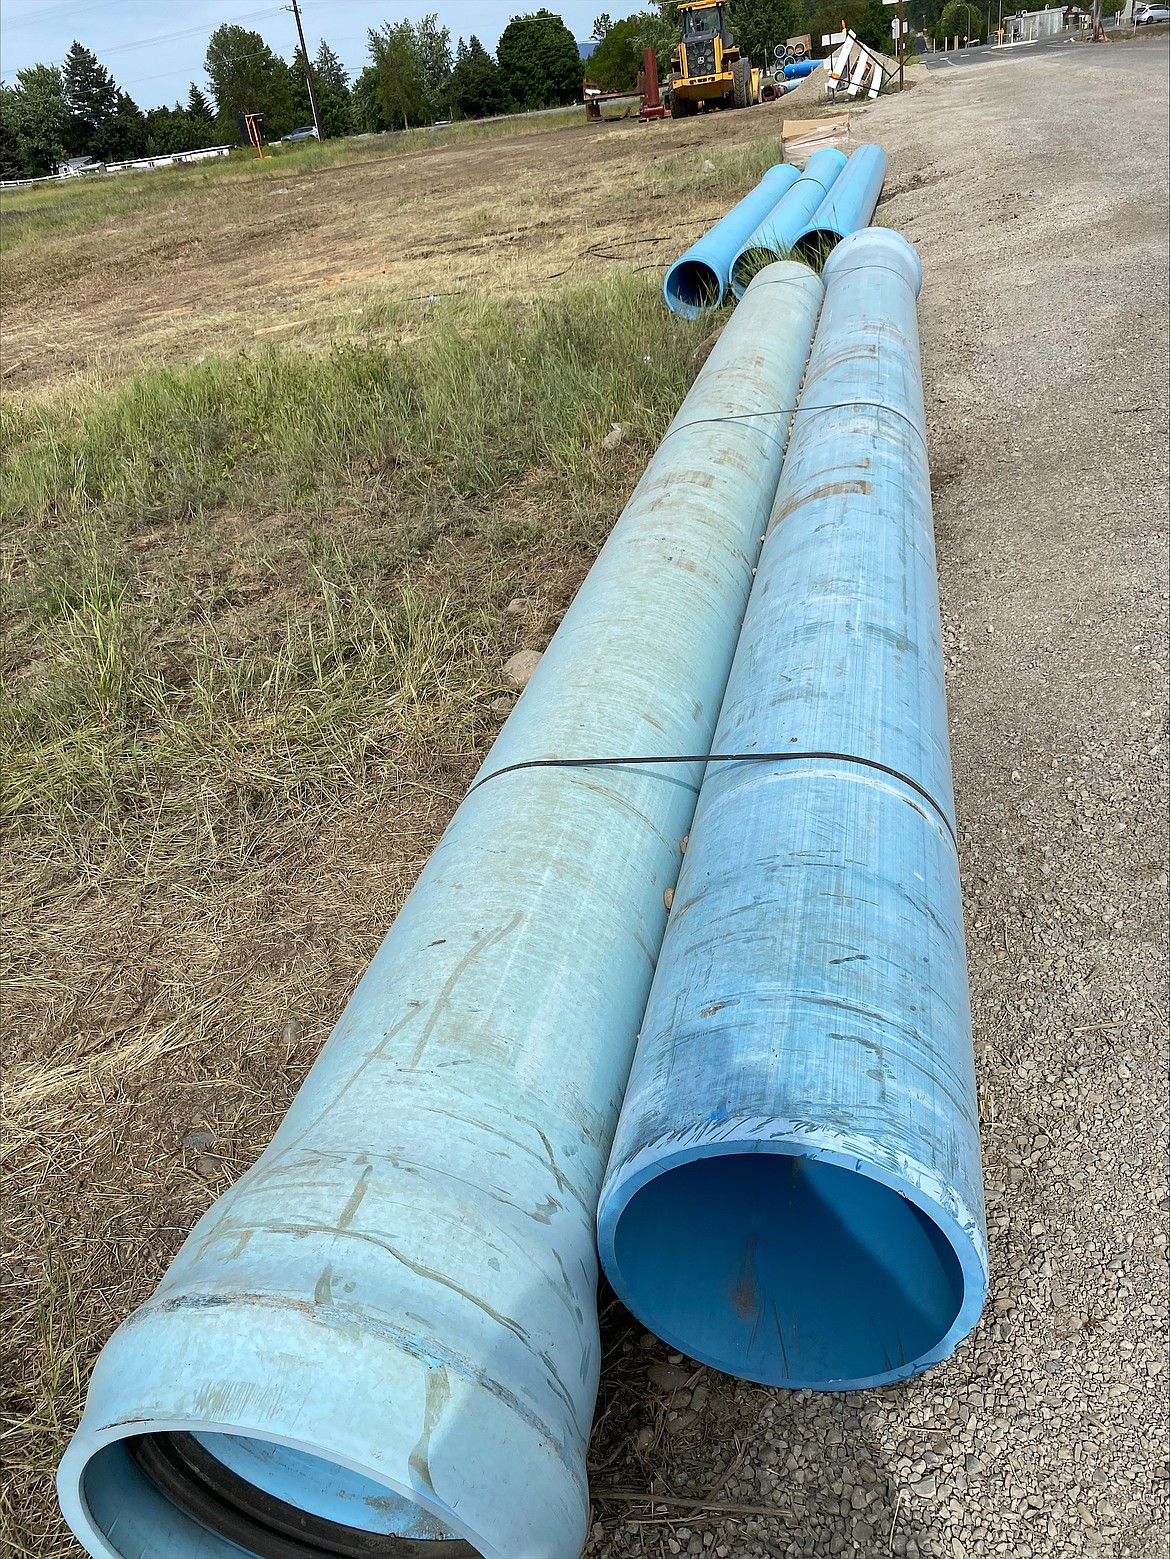 Sewer pipes are being installed along 12th Avenue near Sugar Maple in Post Falls.